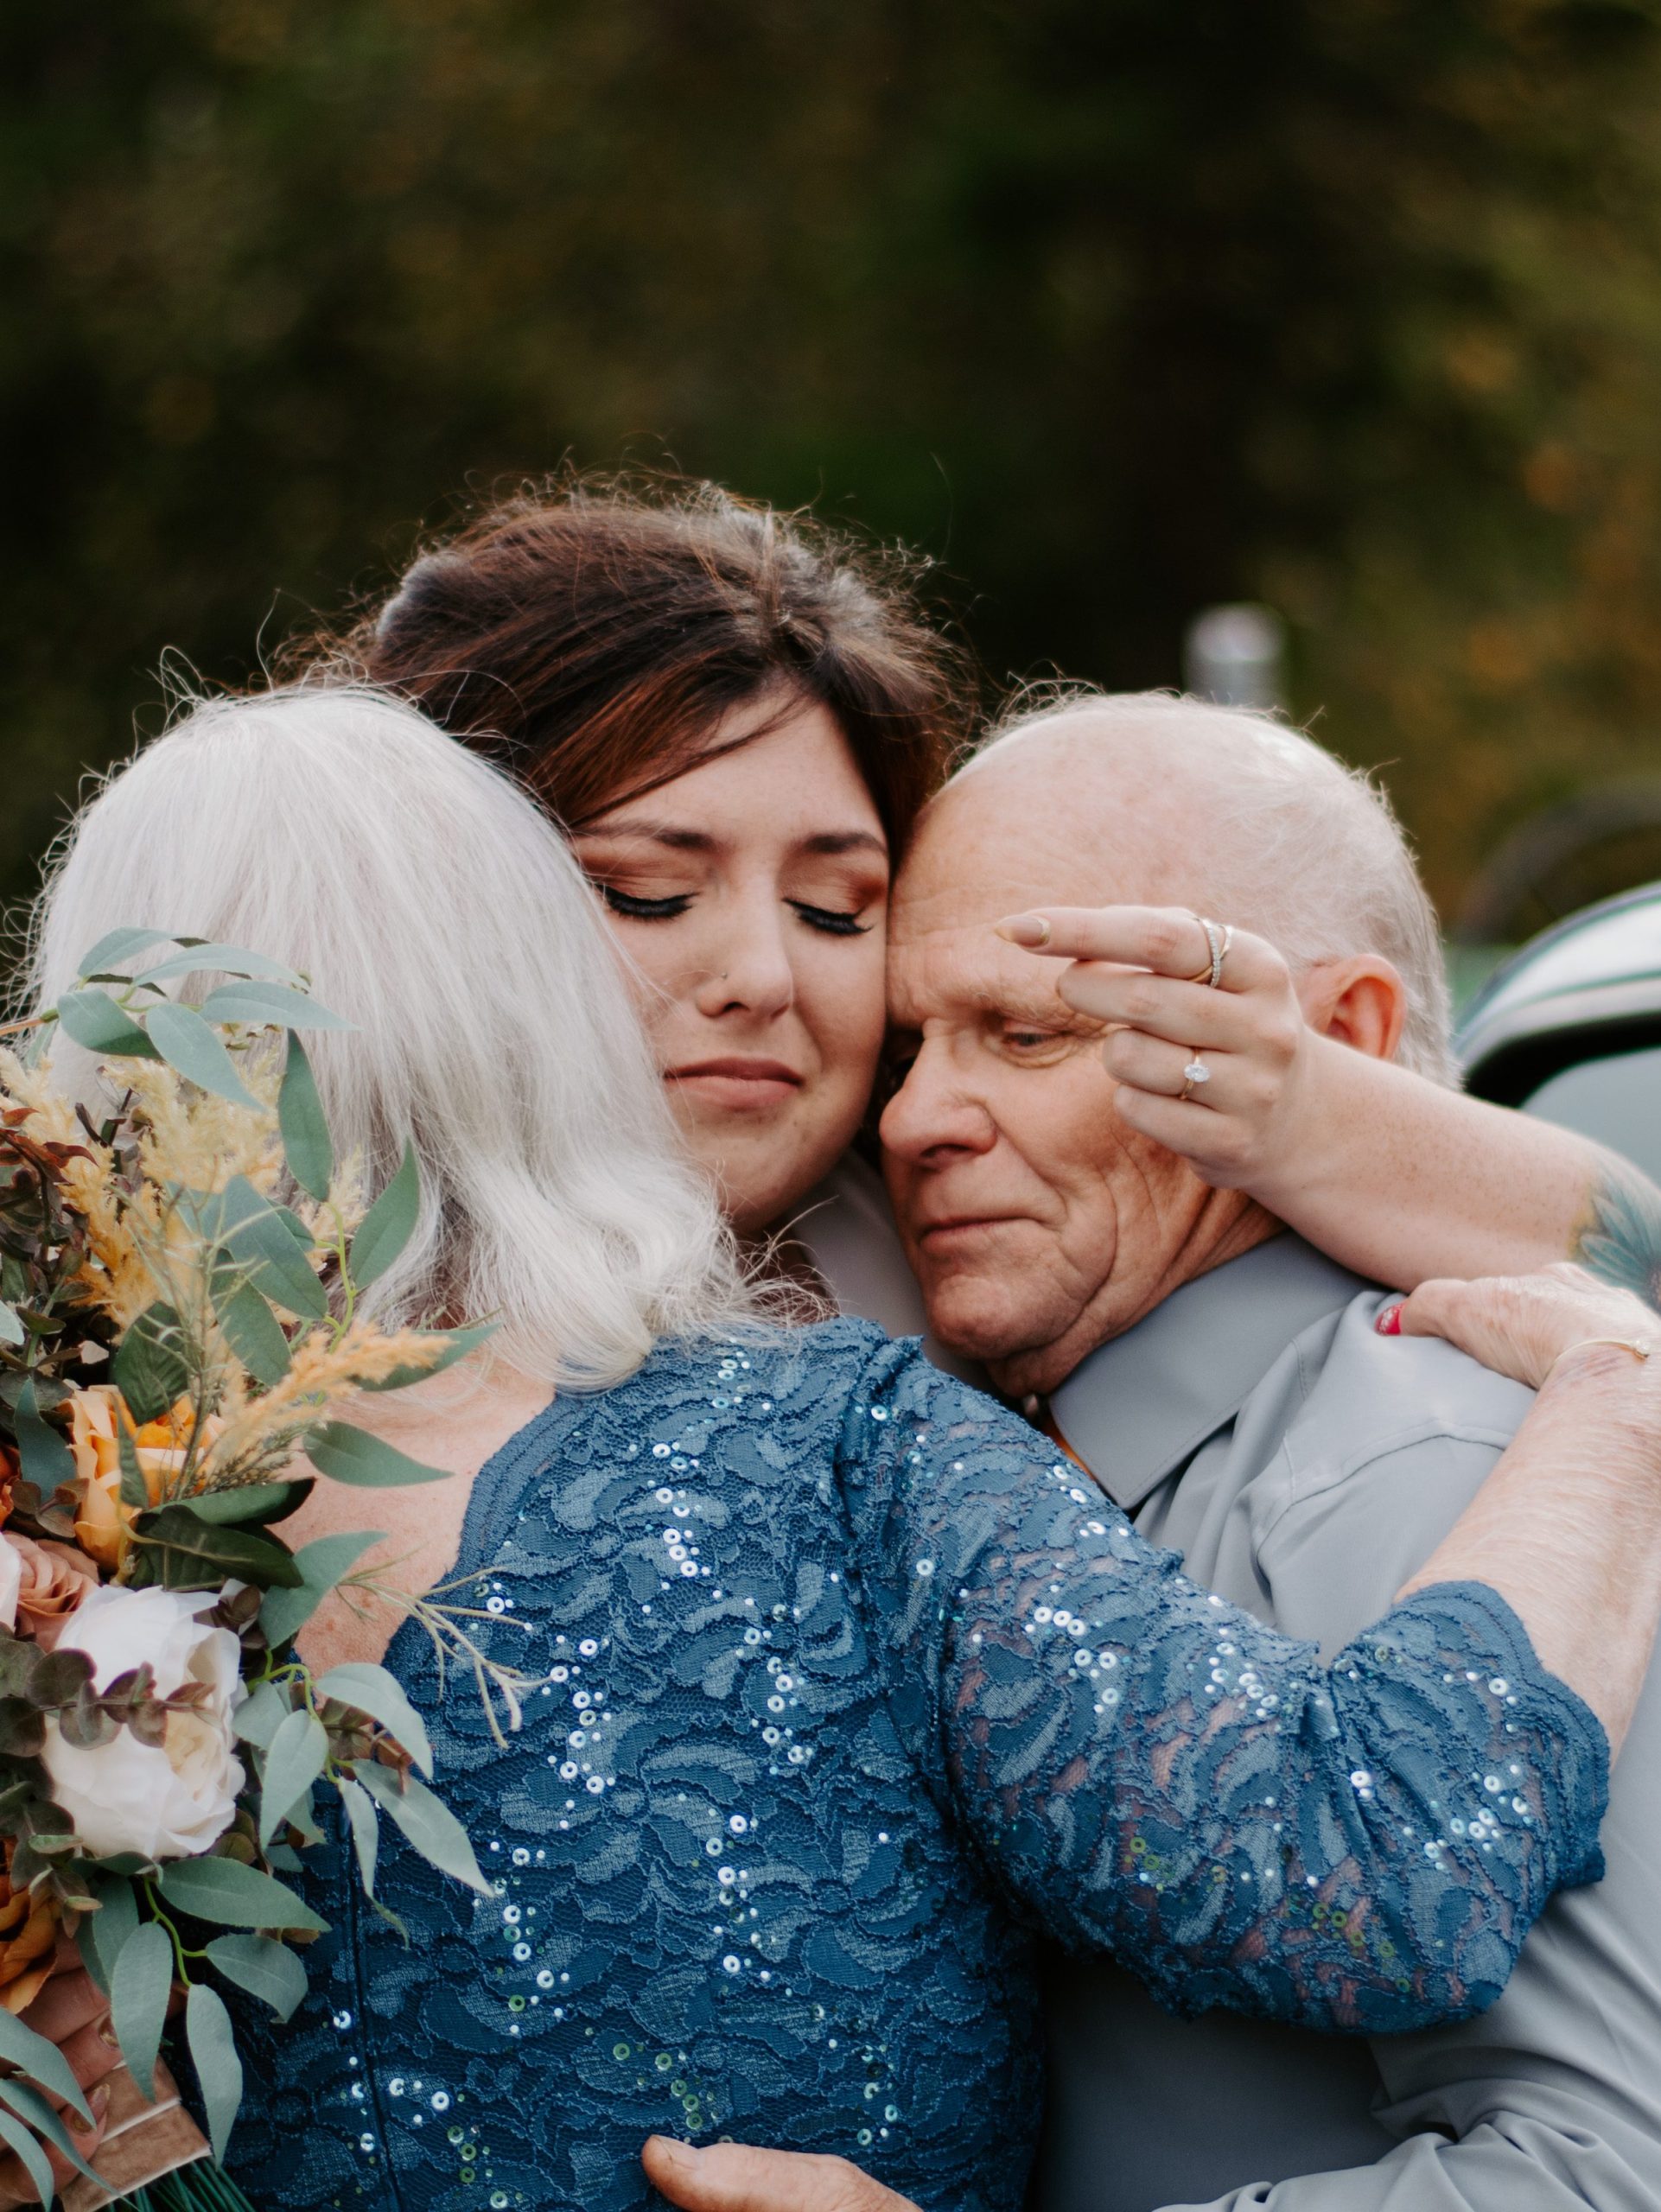 Bride with her mother and father hugging in new wedding tradition